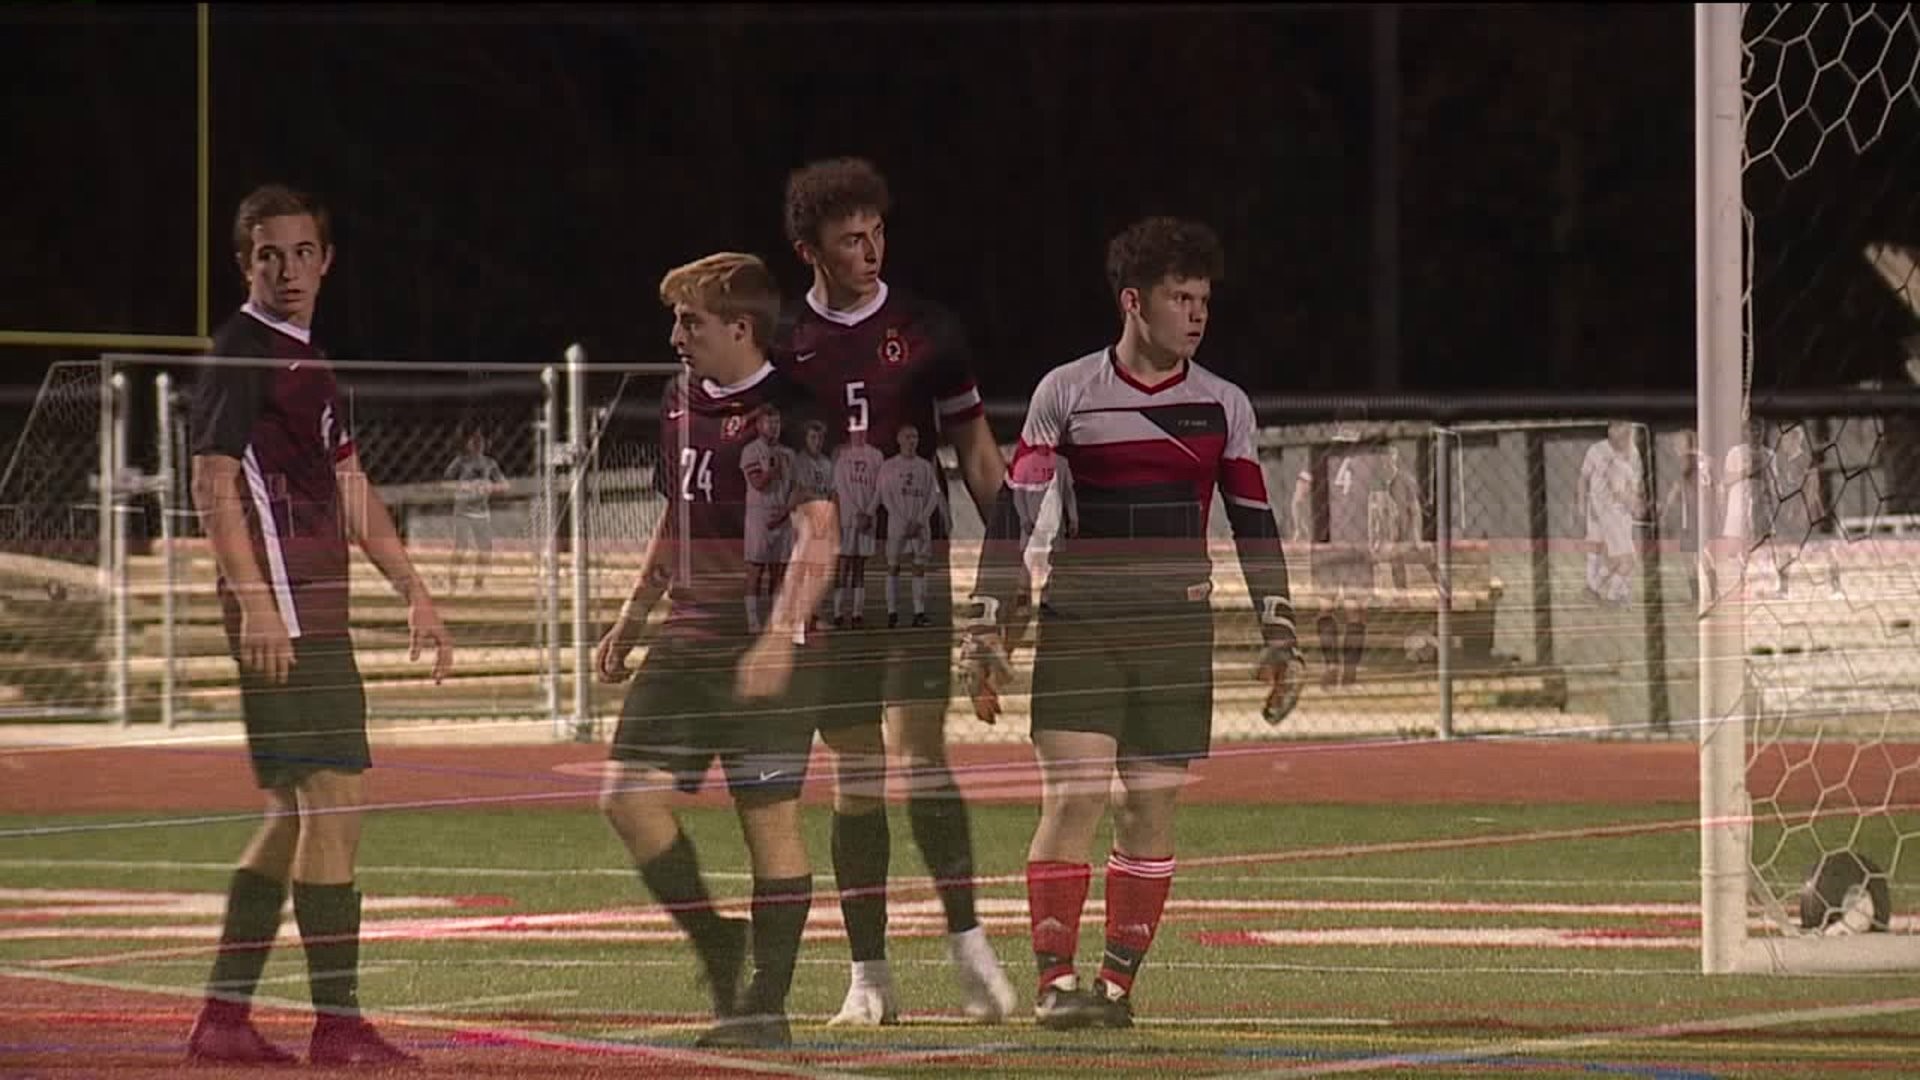 Crestwood Tops Dallas 3-1 in District Semifinals